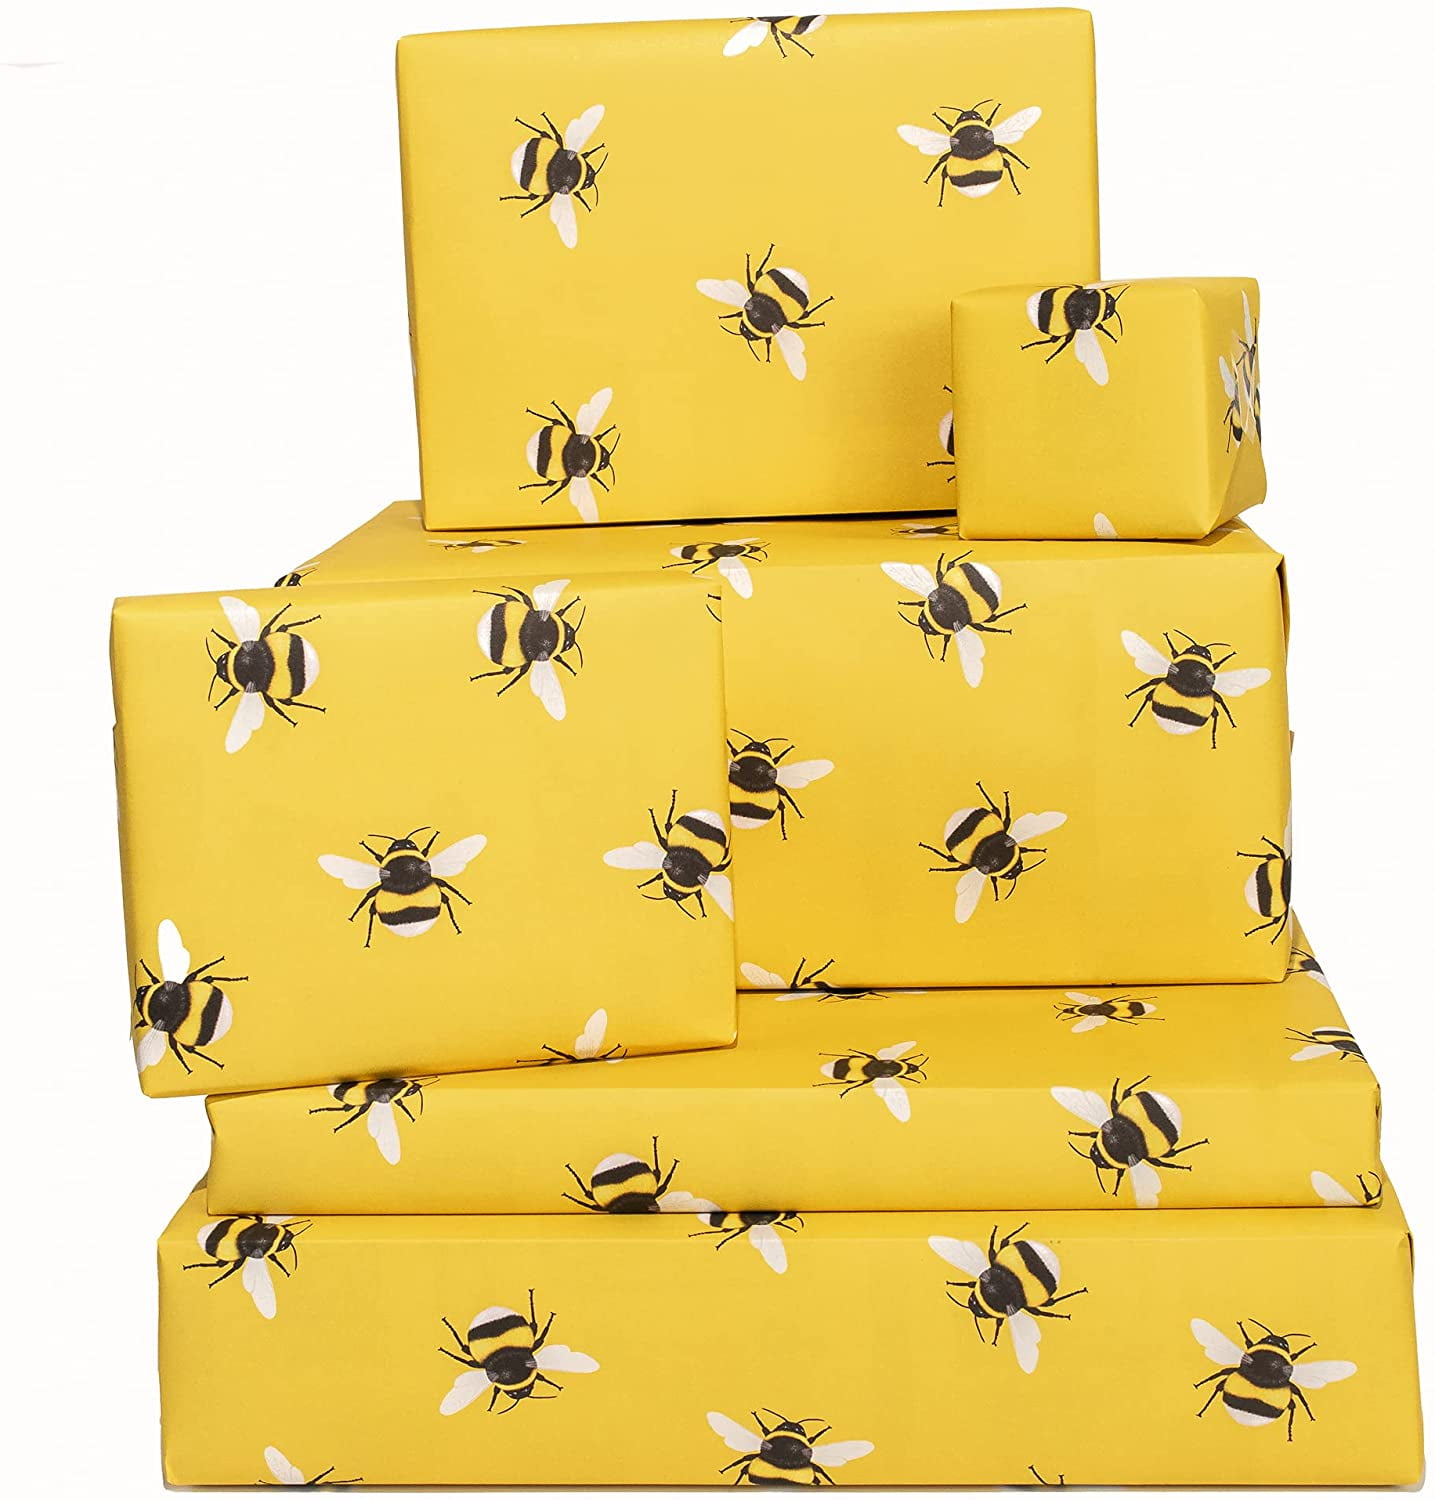 Luxury Lemon Wrapping Paper Yellow Wrapping Paper Lemon Gift Wrap Lemon  Wrapping Paper Roll 